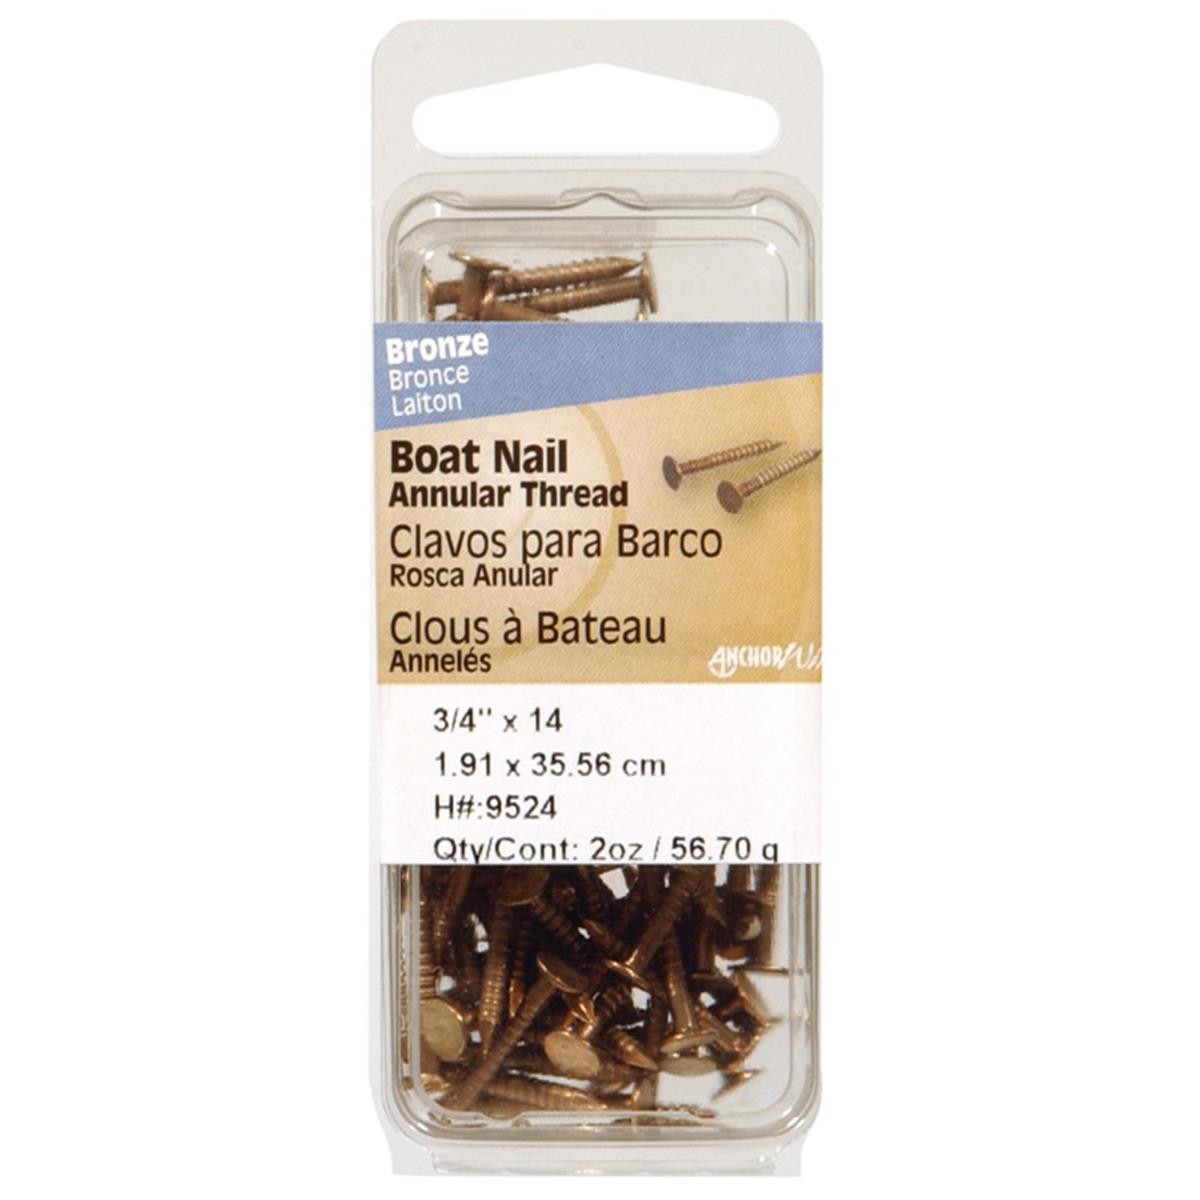 9526 1.25 X 14 Bronze 2 Oz Boat Nail- Pack Of 6